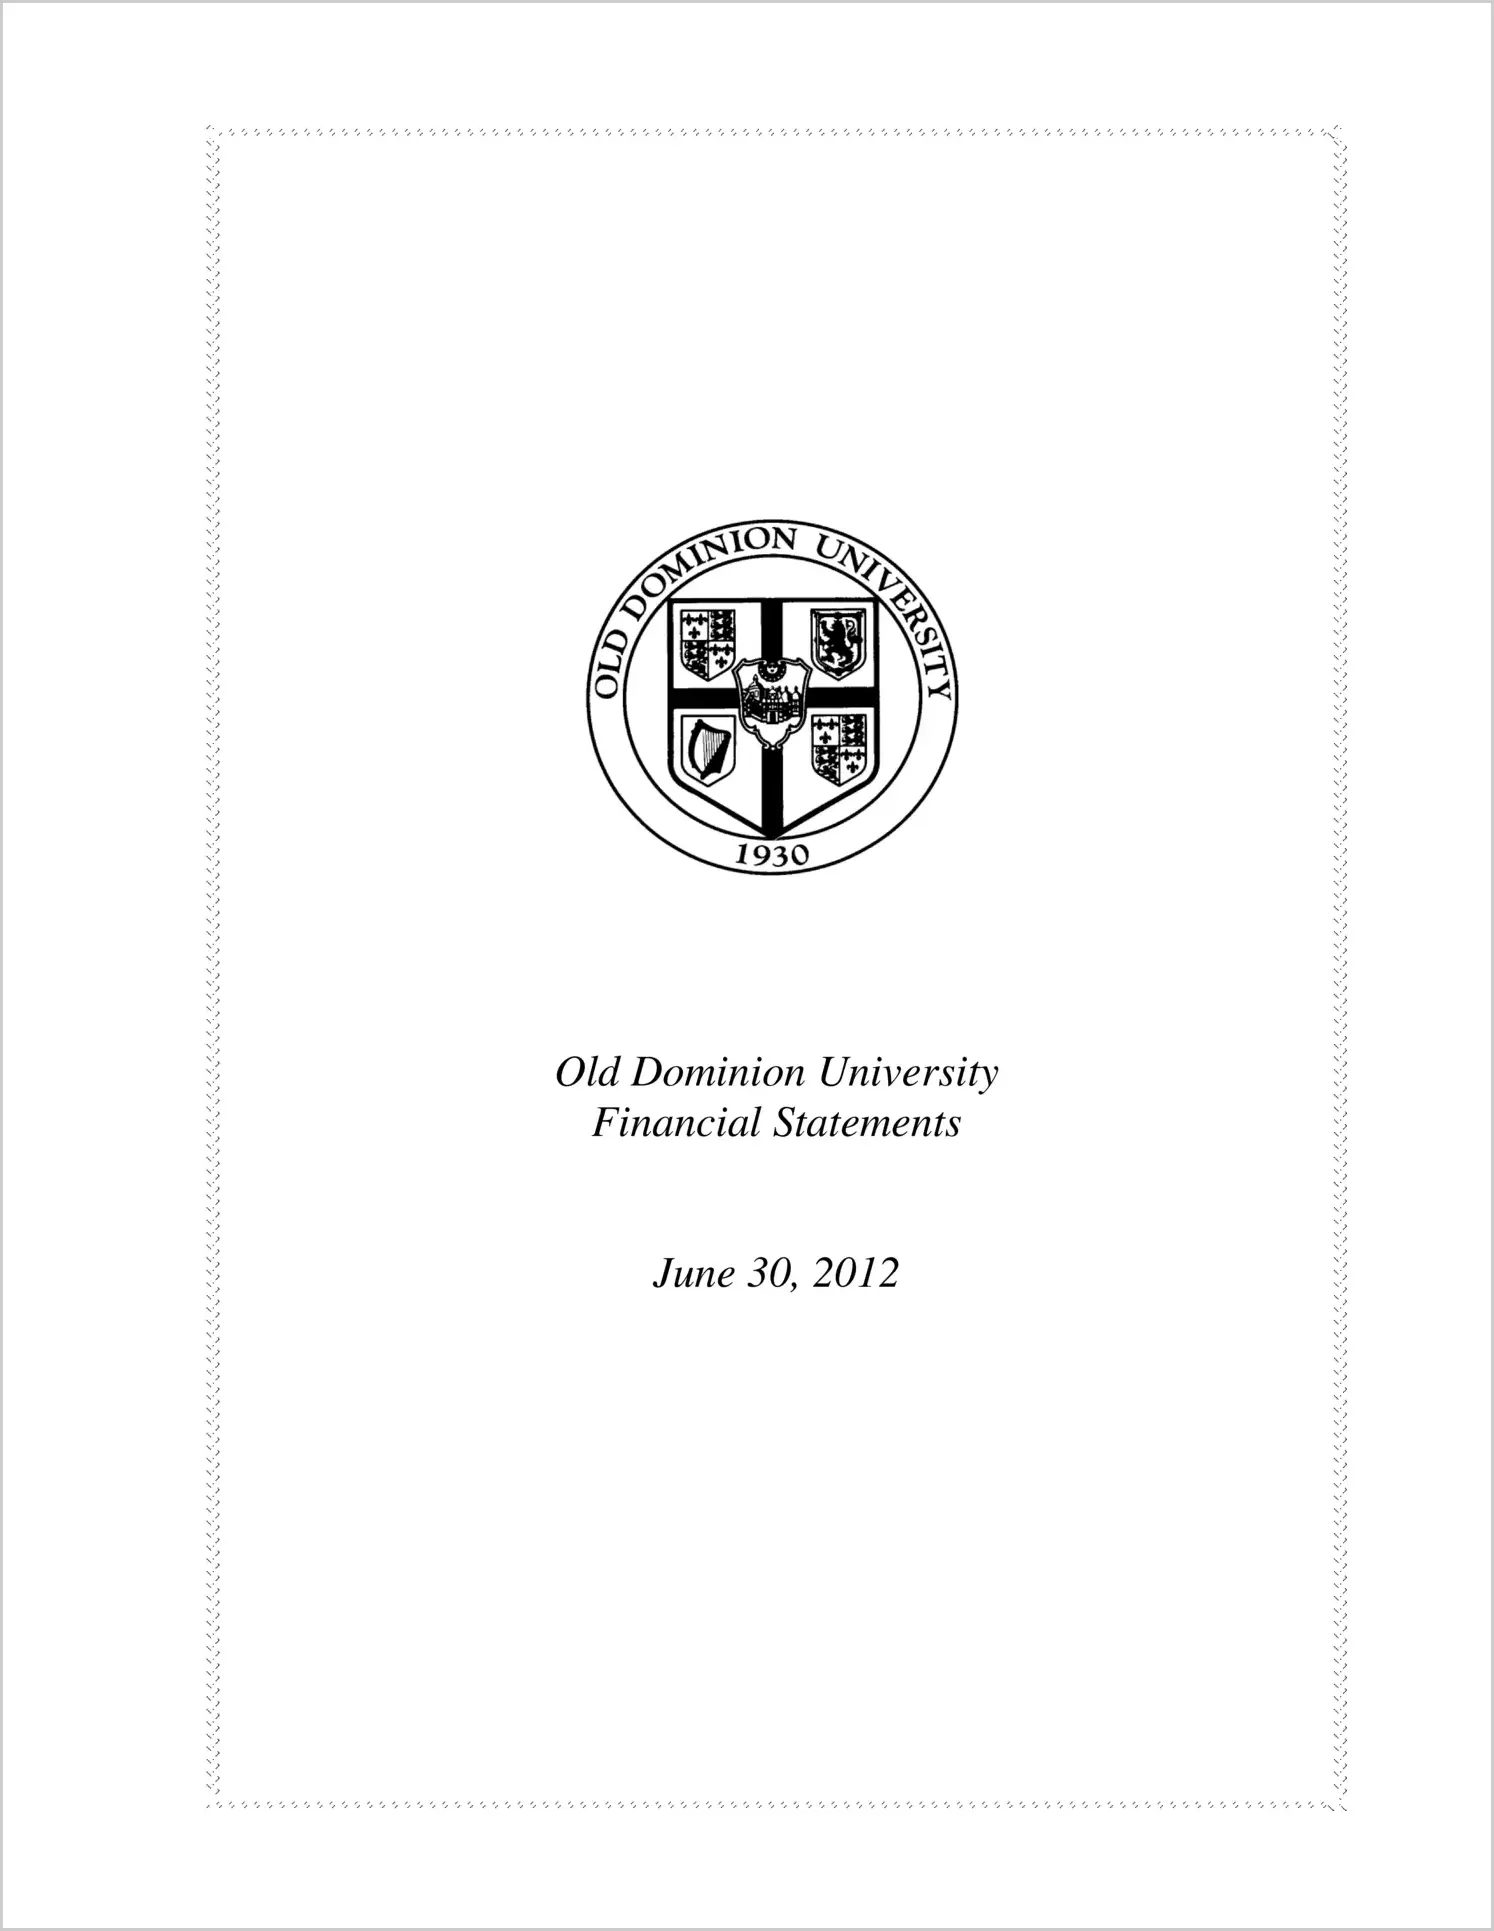 Old Dominion University Financial Statements for the year ended June 30, 2012